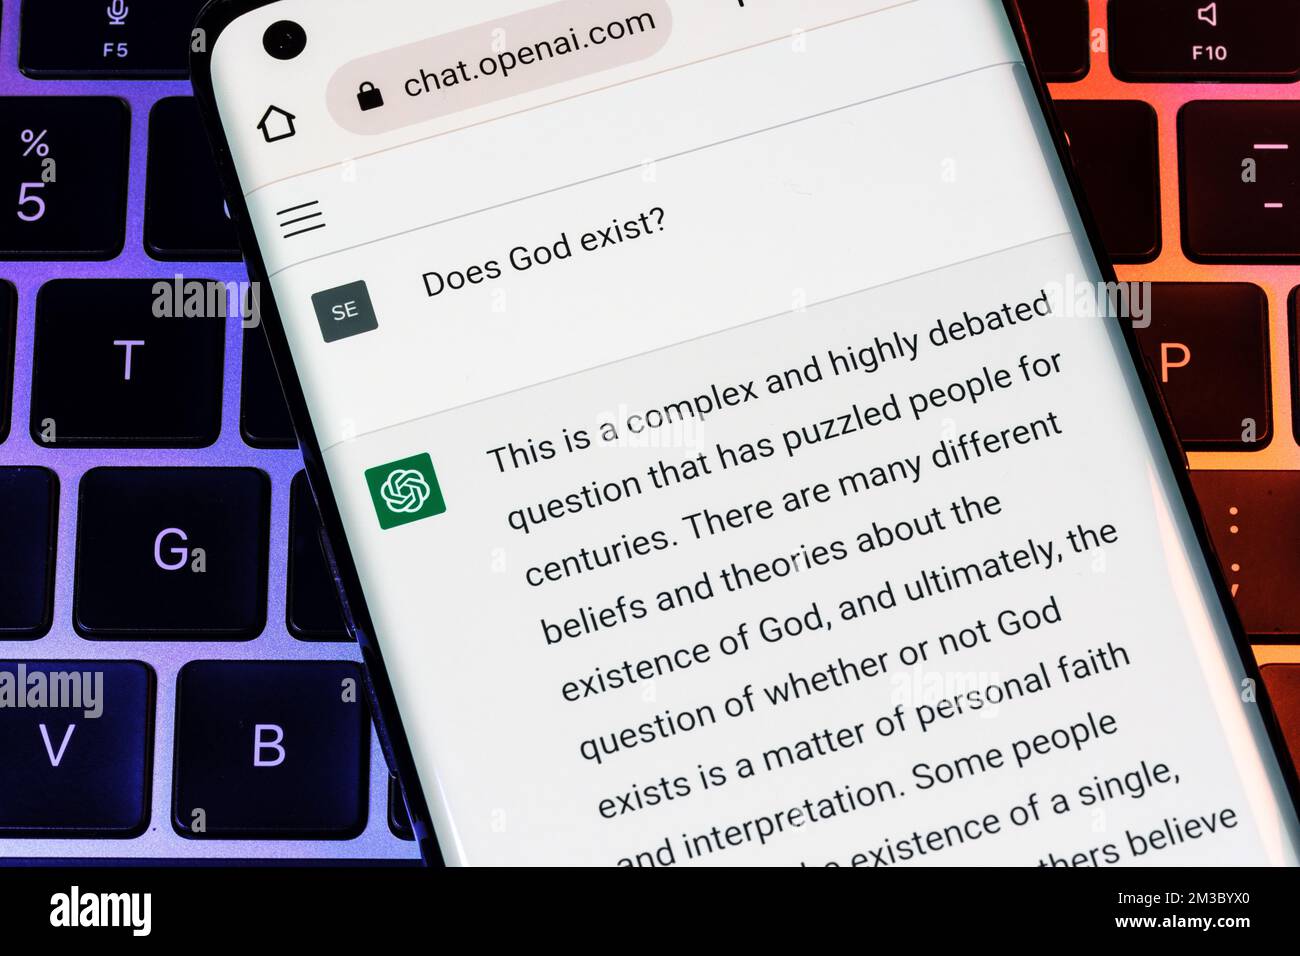 OPEN AI ChatGPT chat bot seen on smartphone placed on laptop. AI chatbot responded to the question about God's existence. Stafford, United Kingdom, De Stock Photo